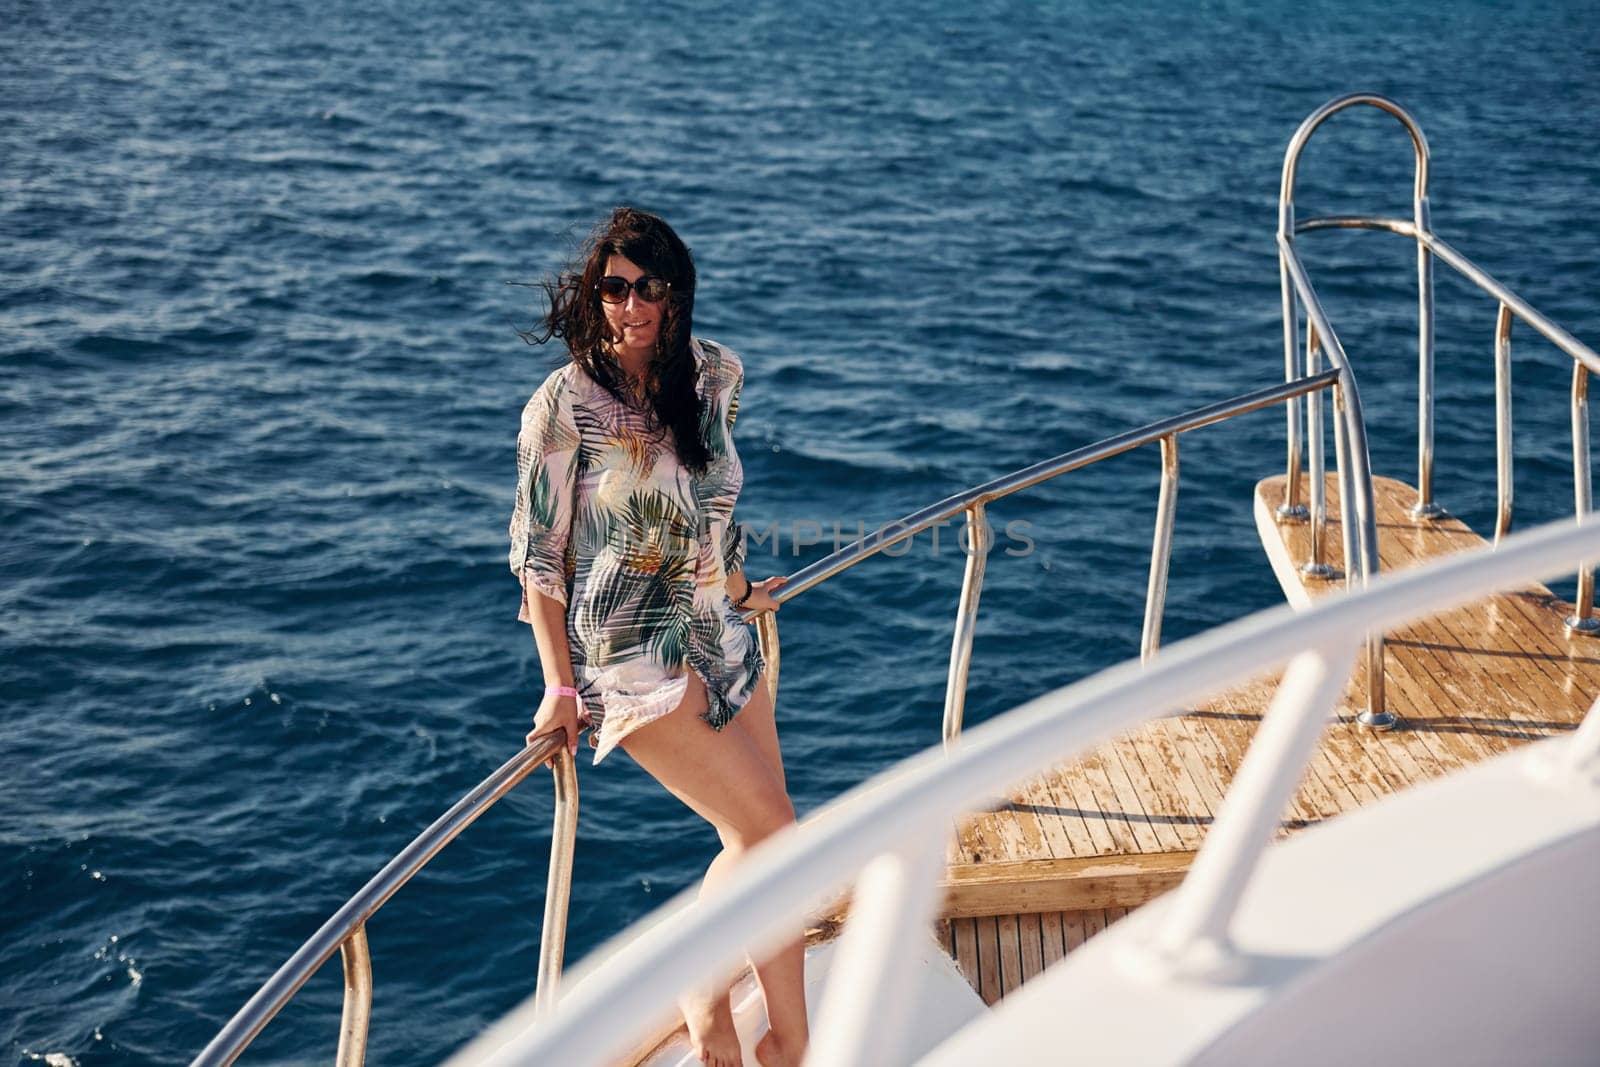 Mature woman standing on the yacht and enjoying her vacation on the sea by Standret